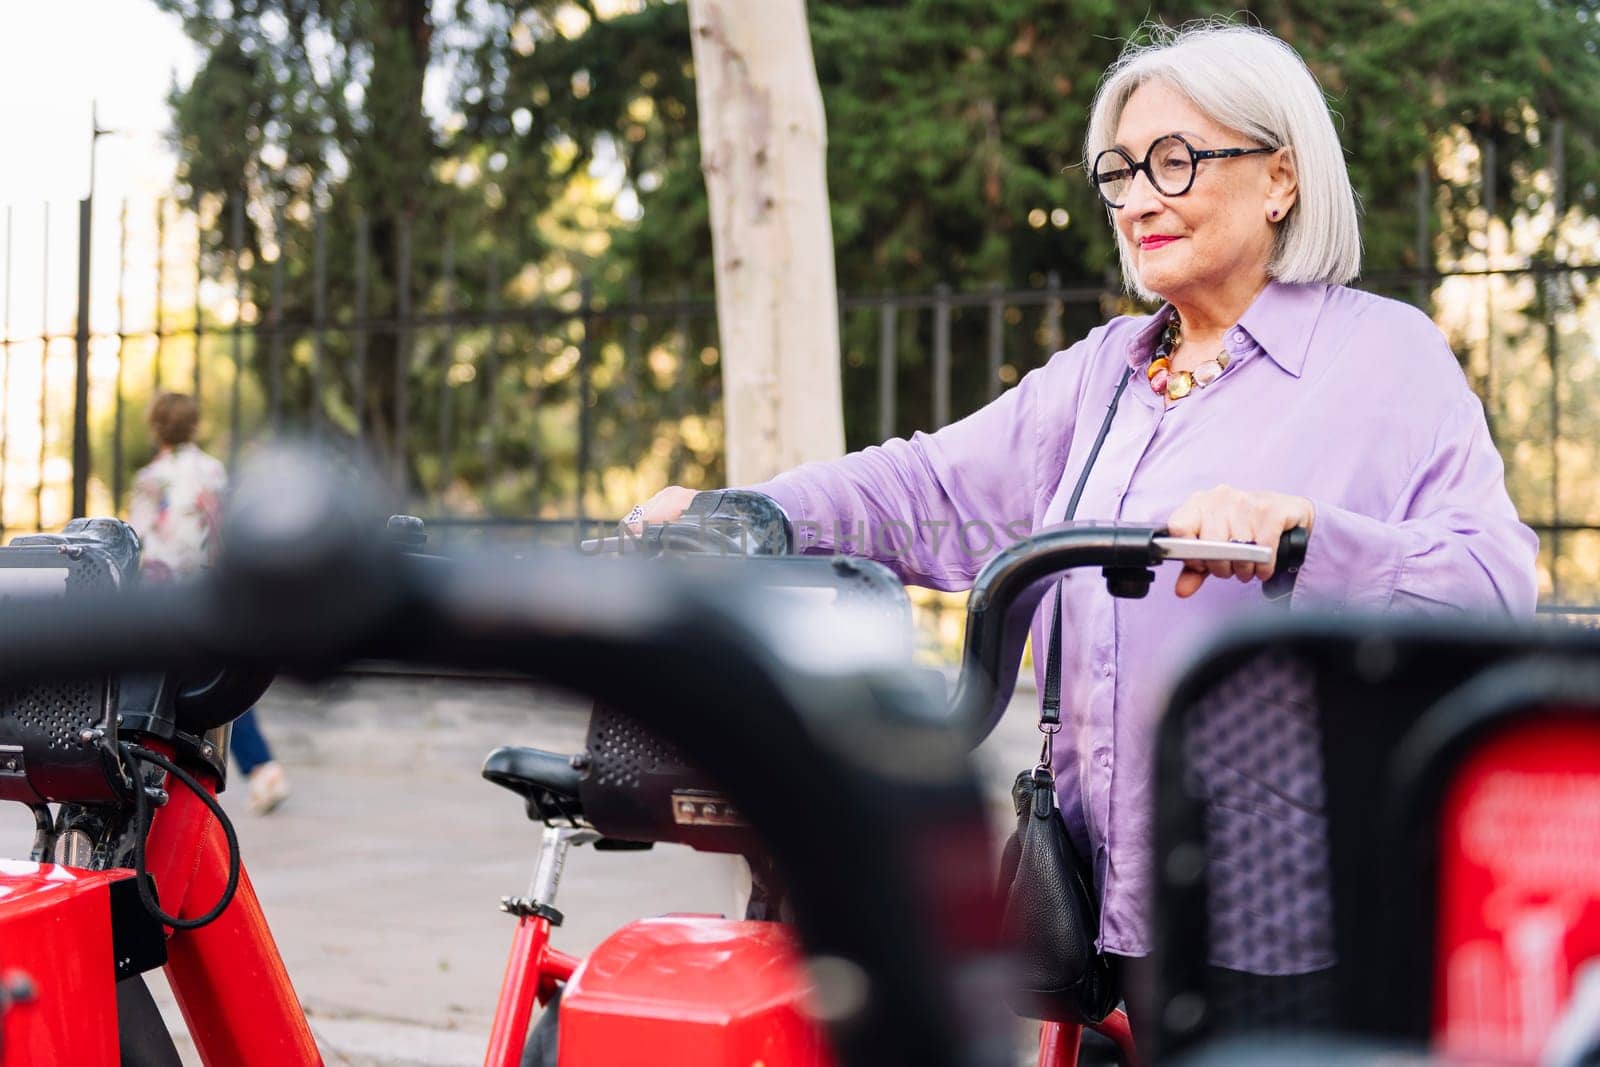 senior woman taking rental bike from parking row, concept of sustainable mobility and active lifestyle in elderly people